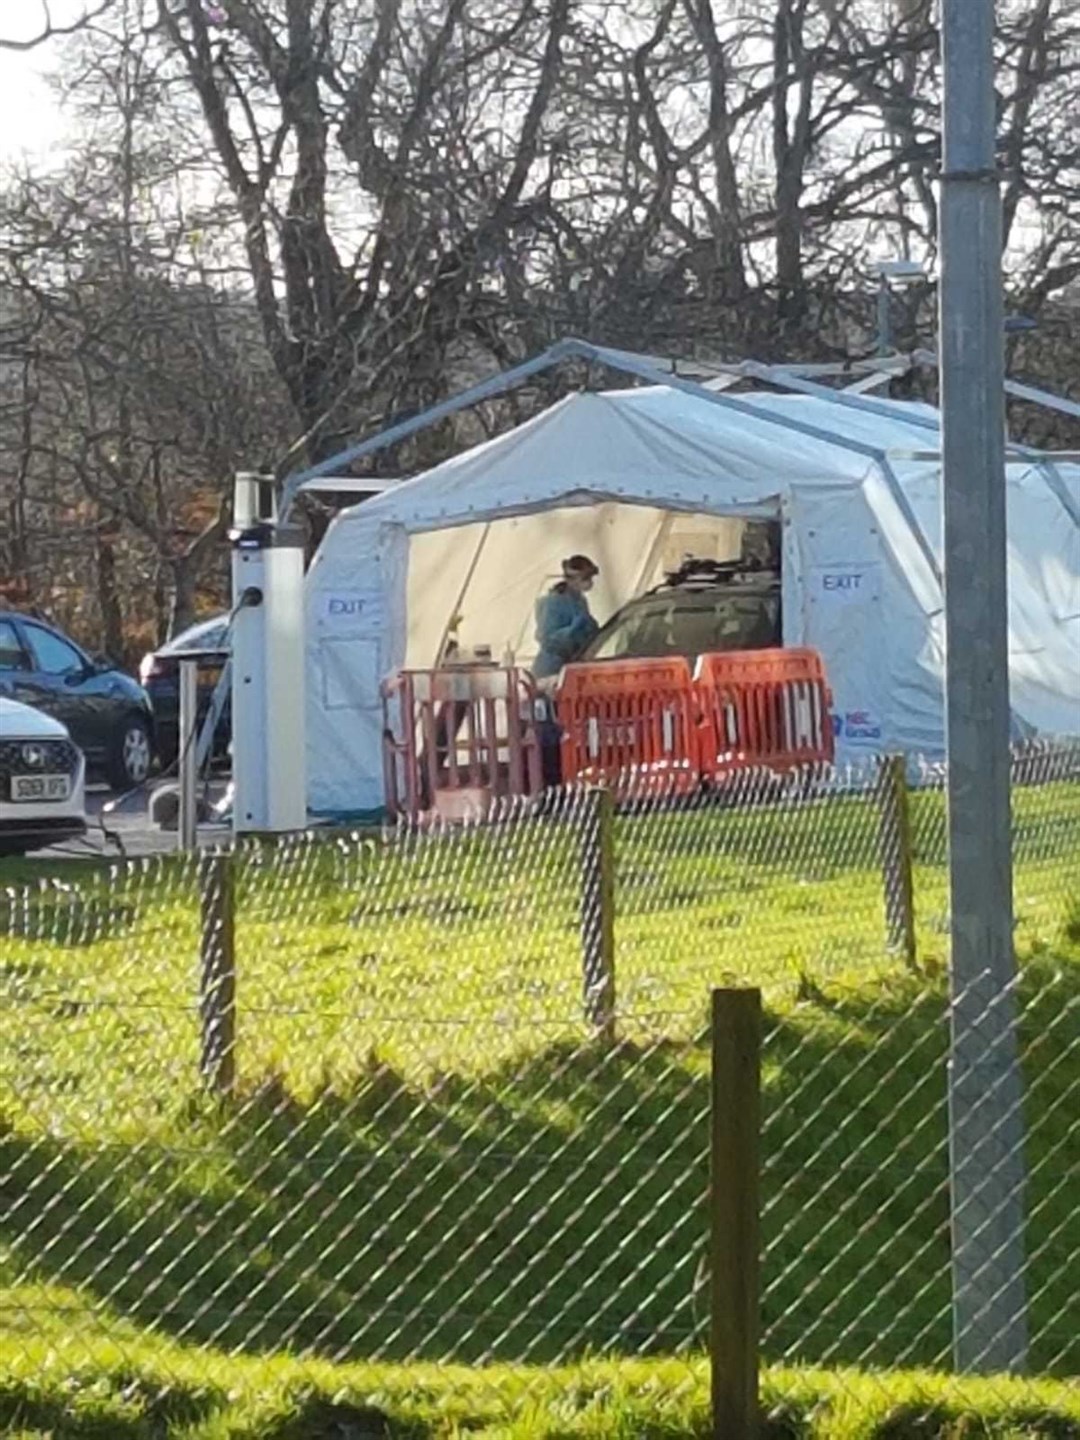 A tent for drive-through coronavirus testing at Raigmore Hospital in Inverness. Similar facilities have been set up at a number of hospitals across Scotland.